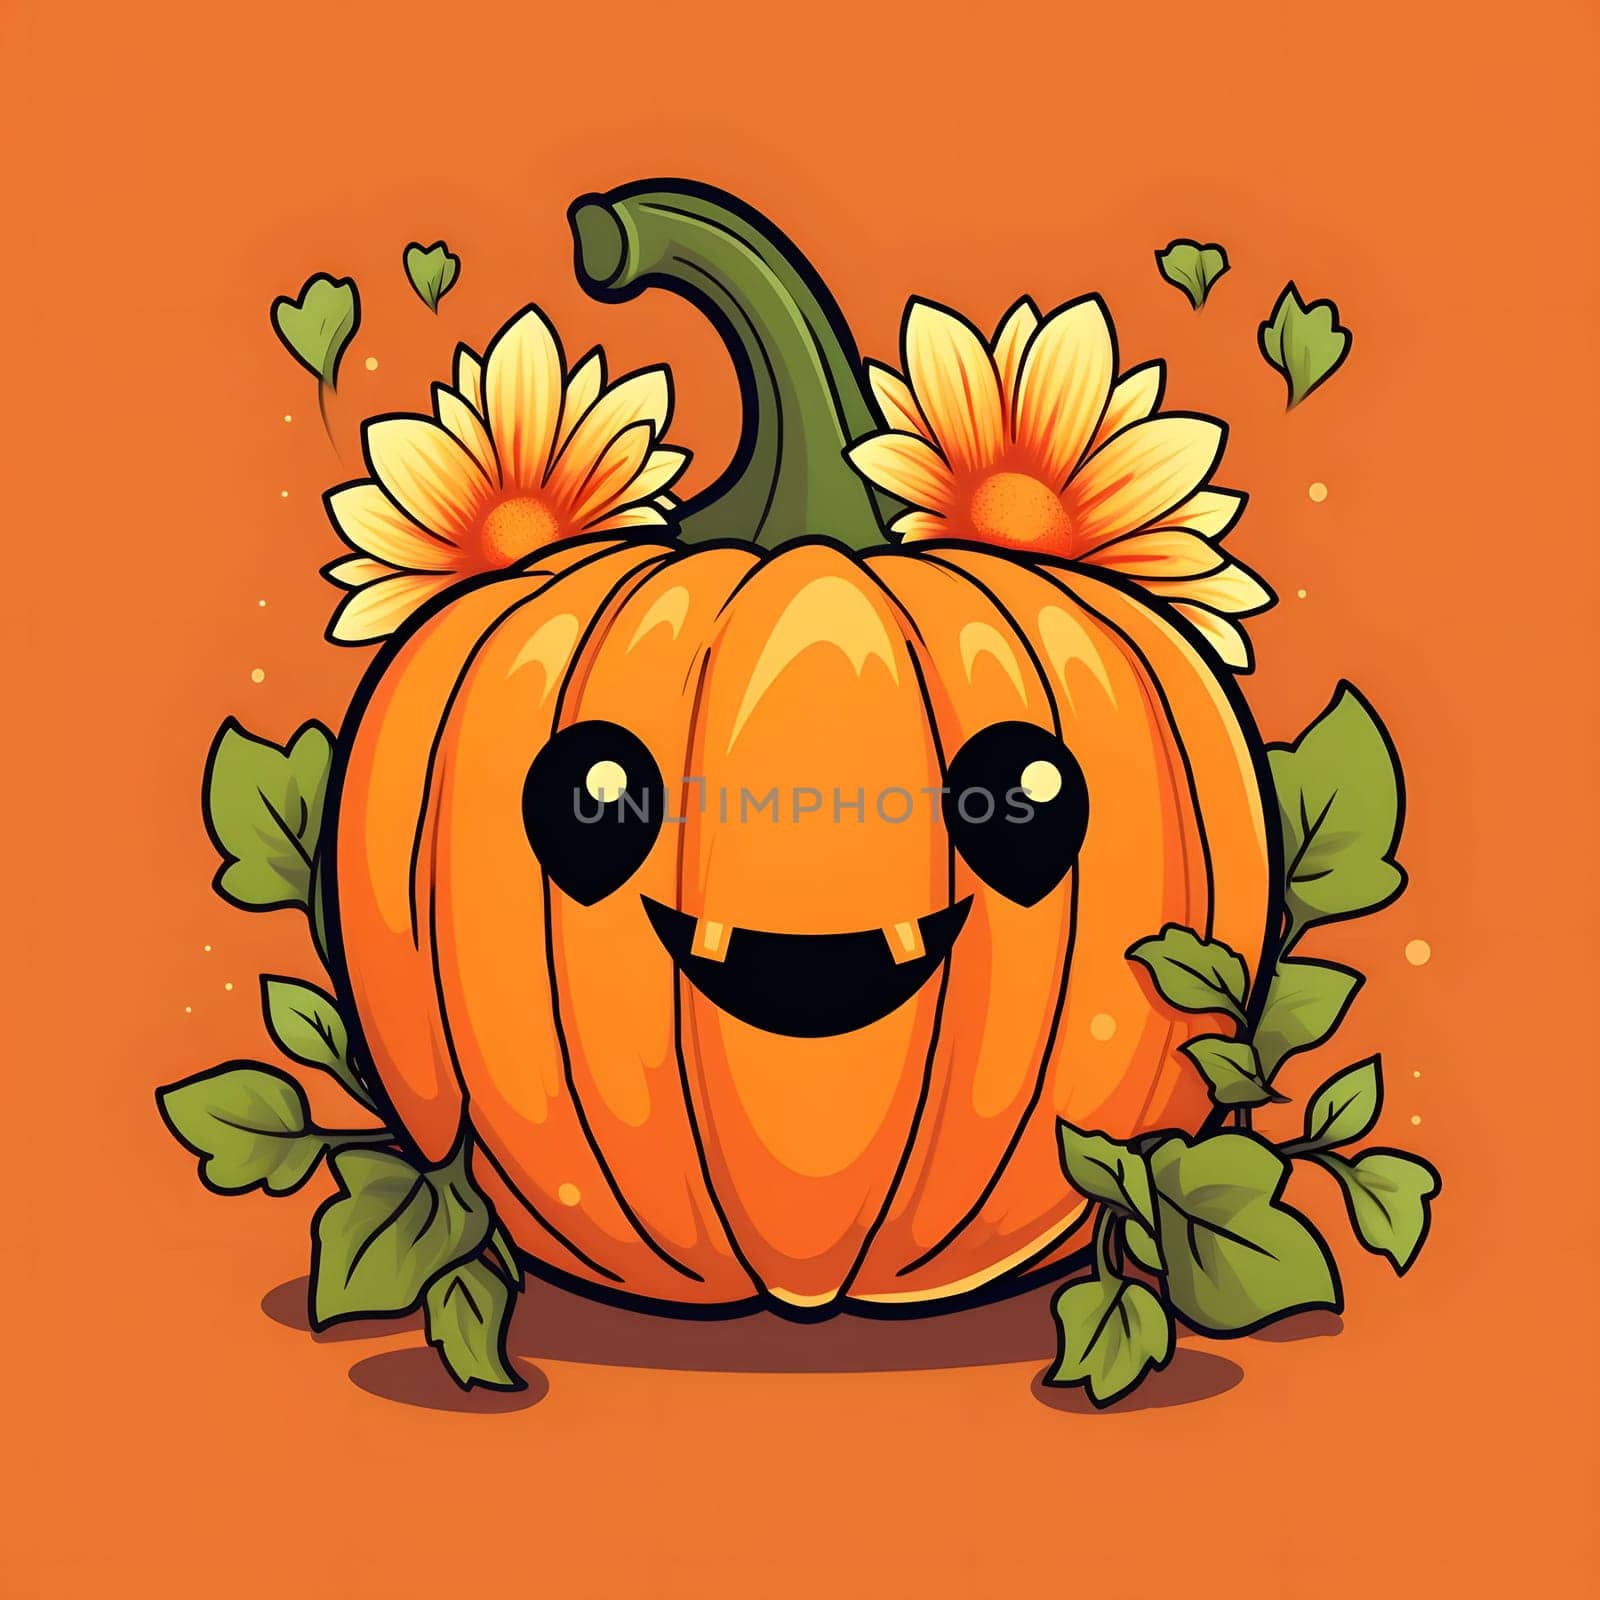 Smiling pumpkin with teeth on an orange isolated background. Pumpkin as a dish of thanksgiving for the harvest. by ThemesS